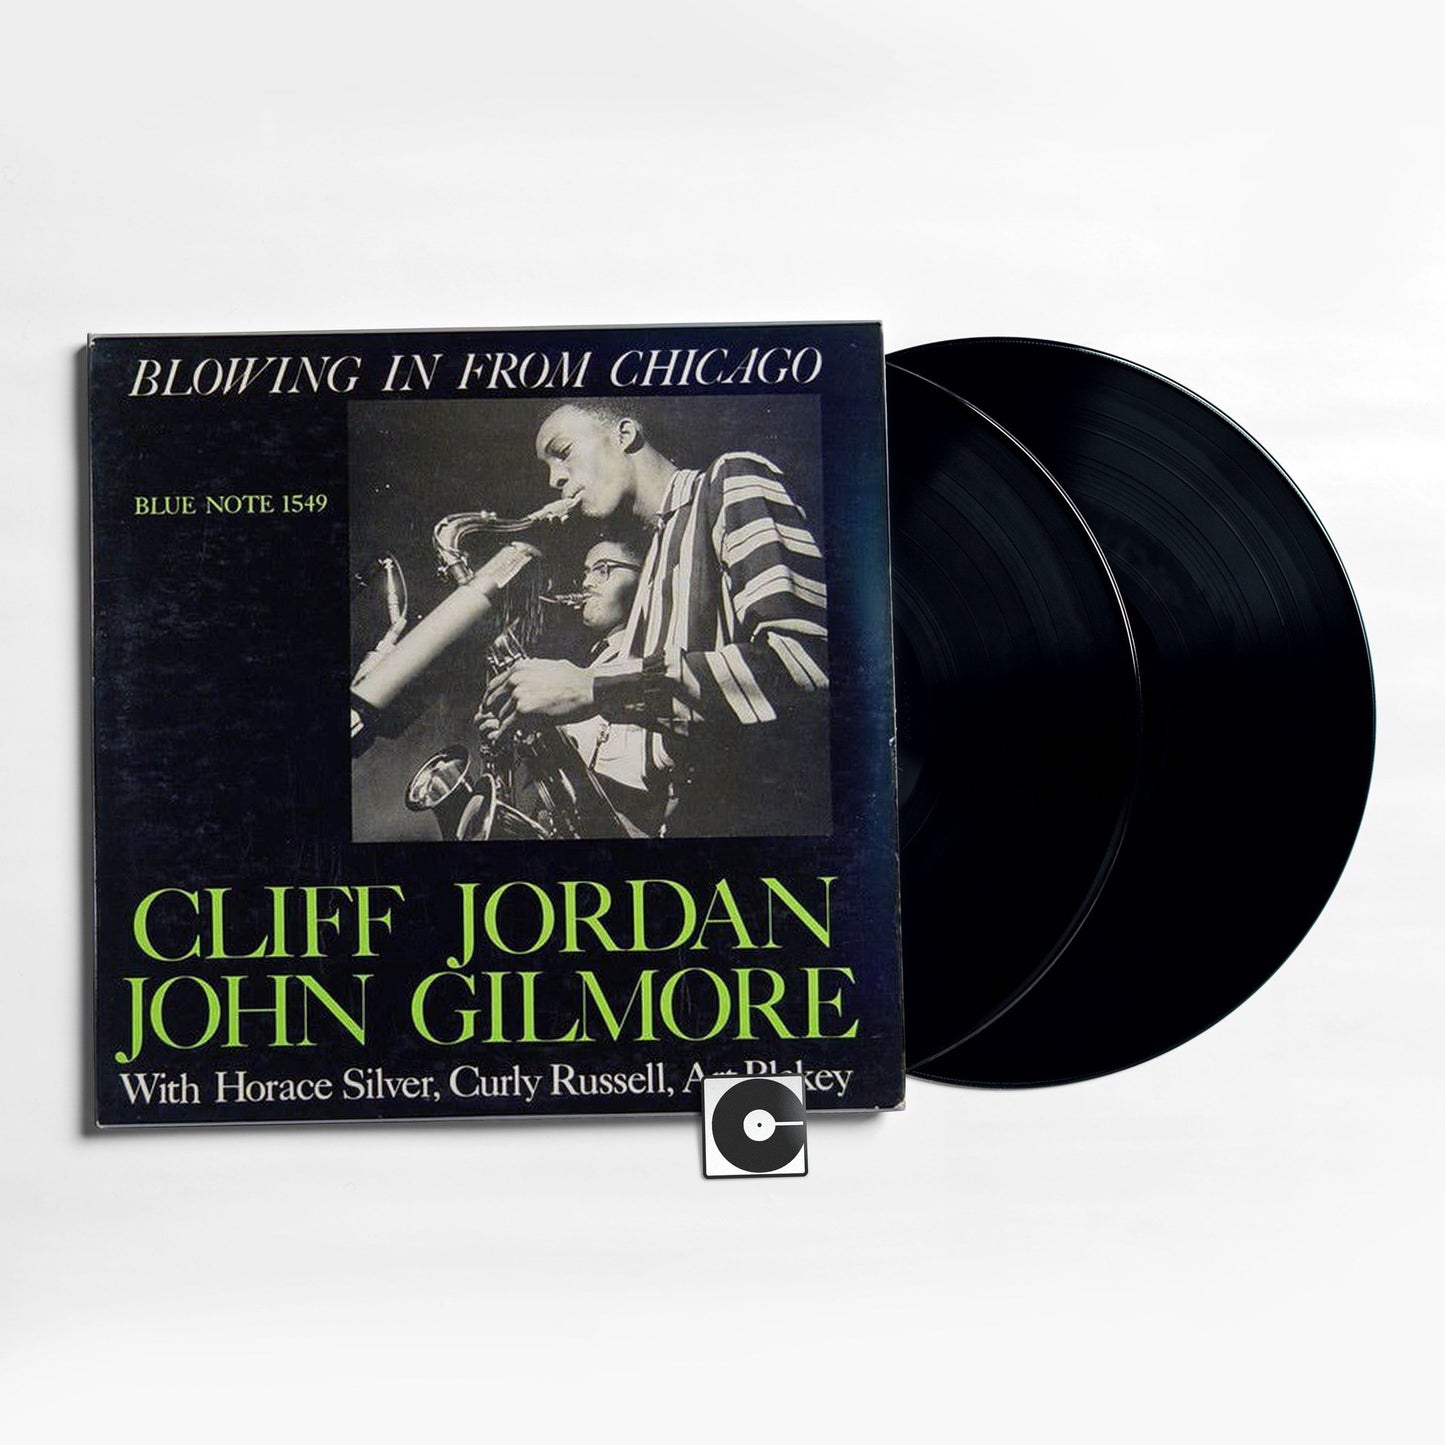 Cliff Jordan - "Blowing In From Chicago" Analogue Productions